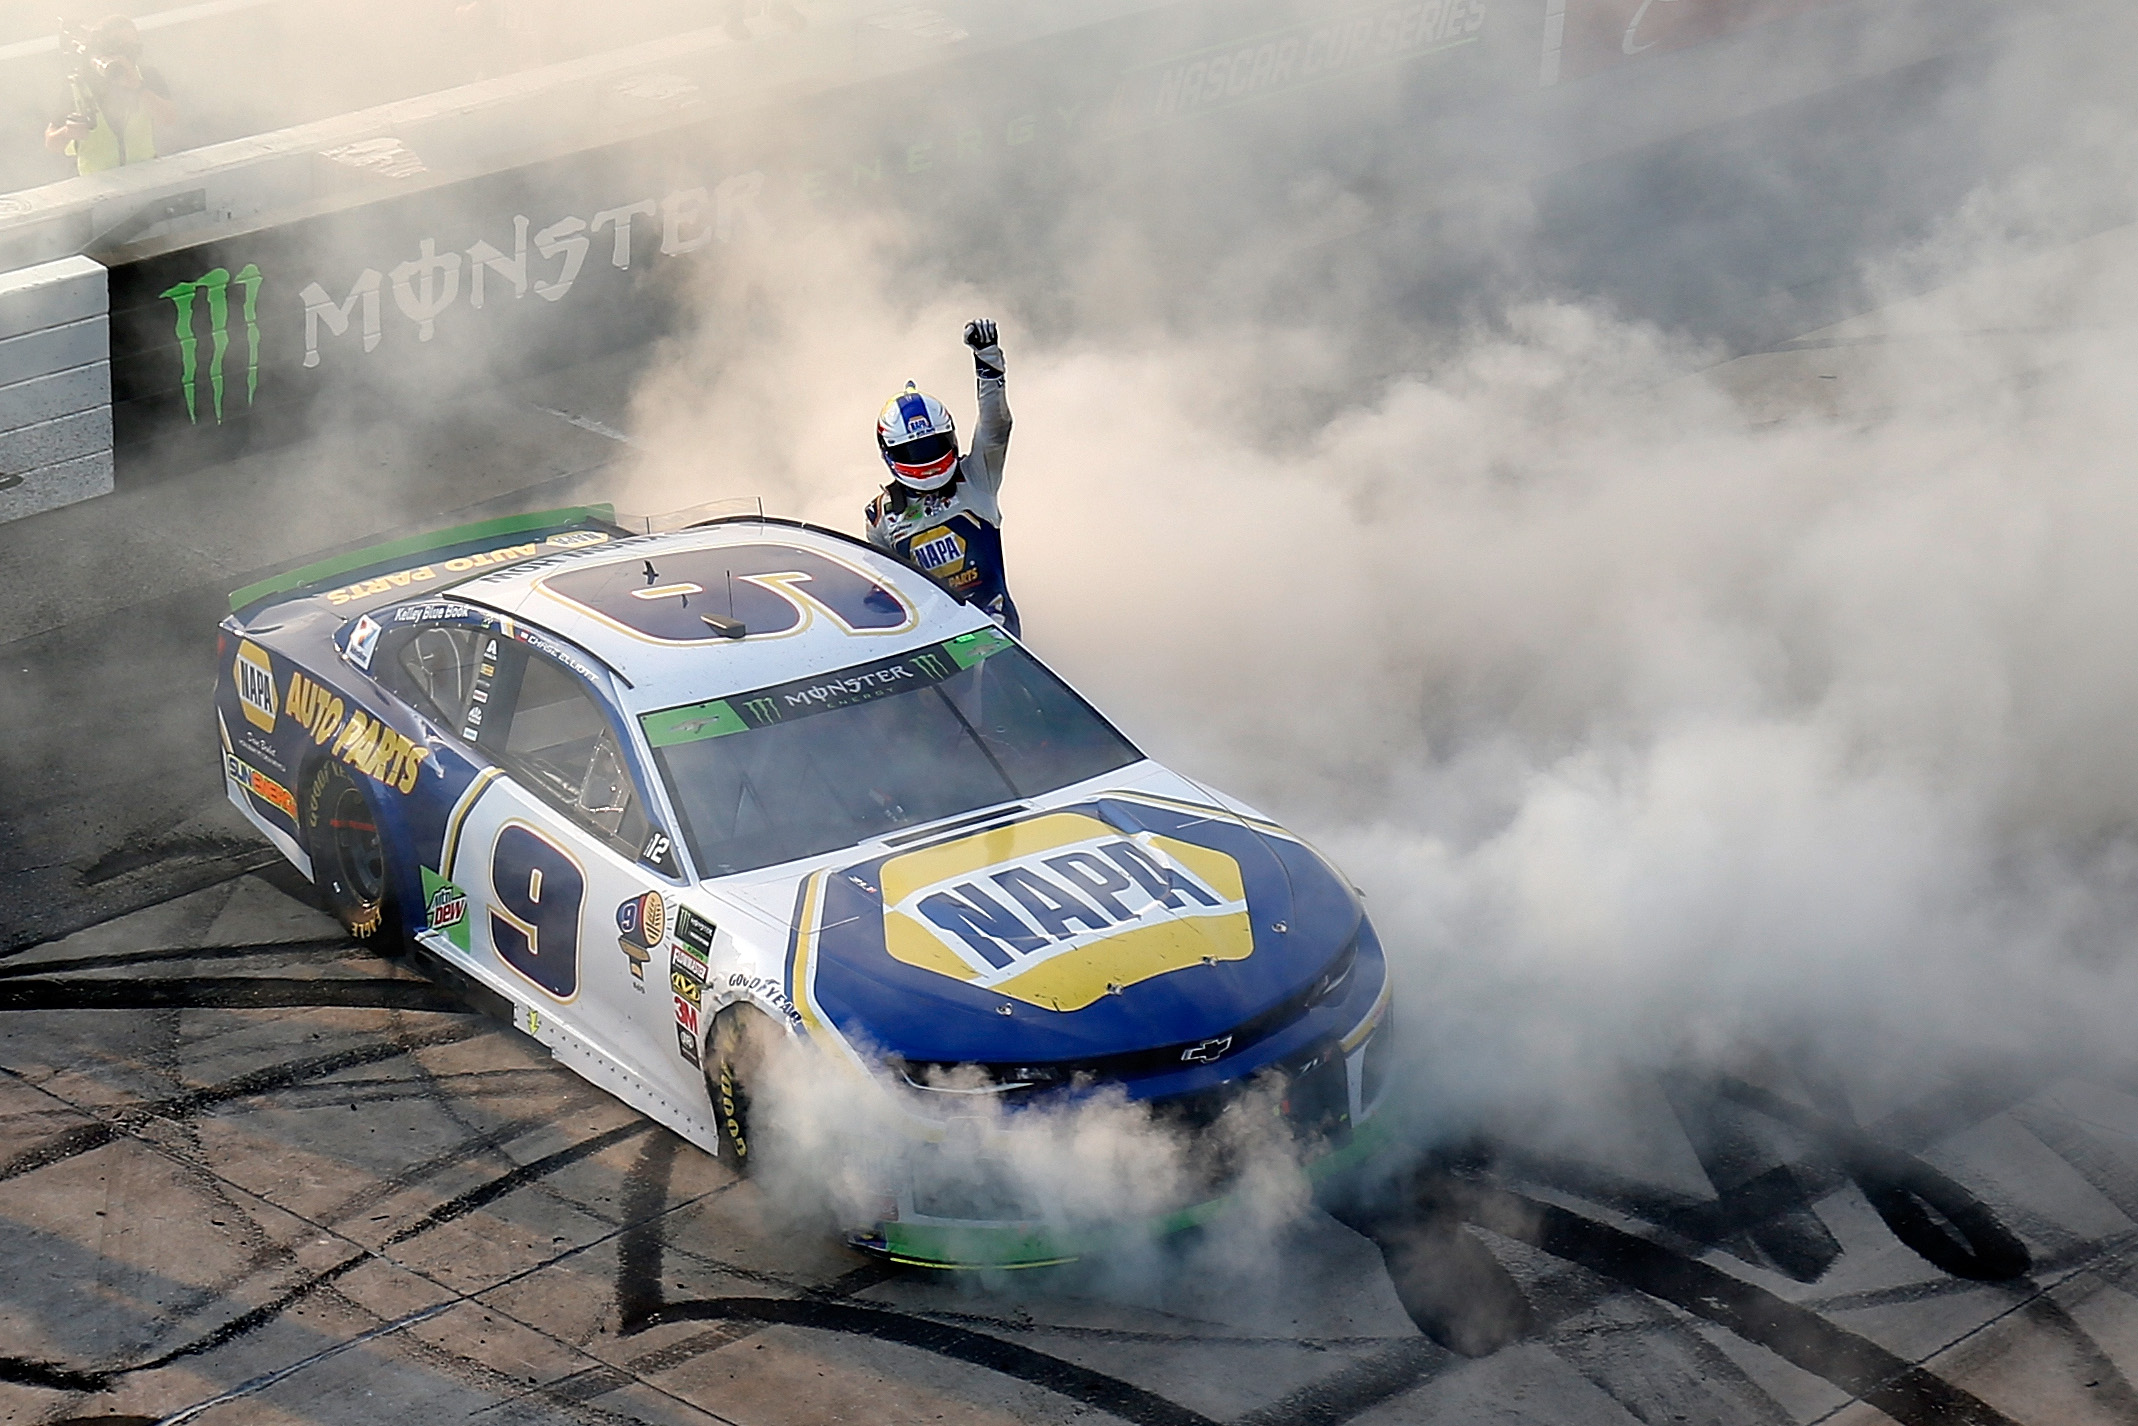 Old tires for the new guard, but Chase Elliott is continuing his quest for a championship.